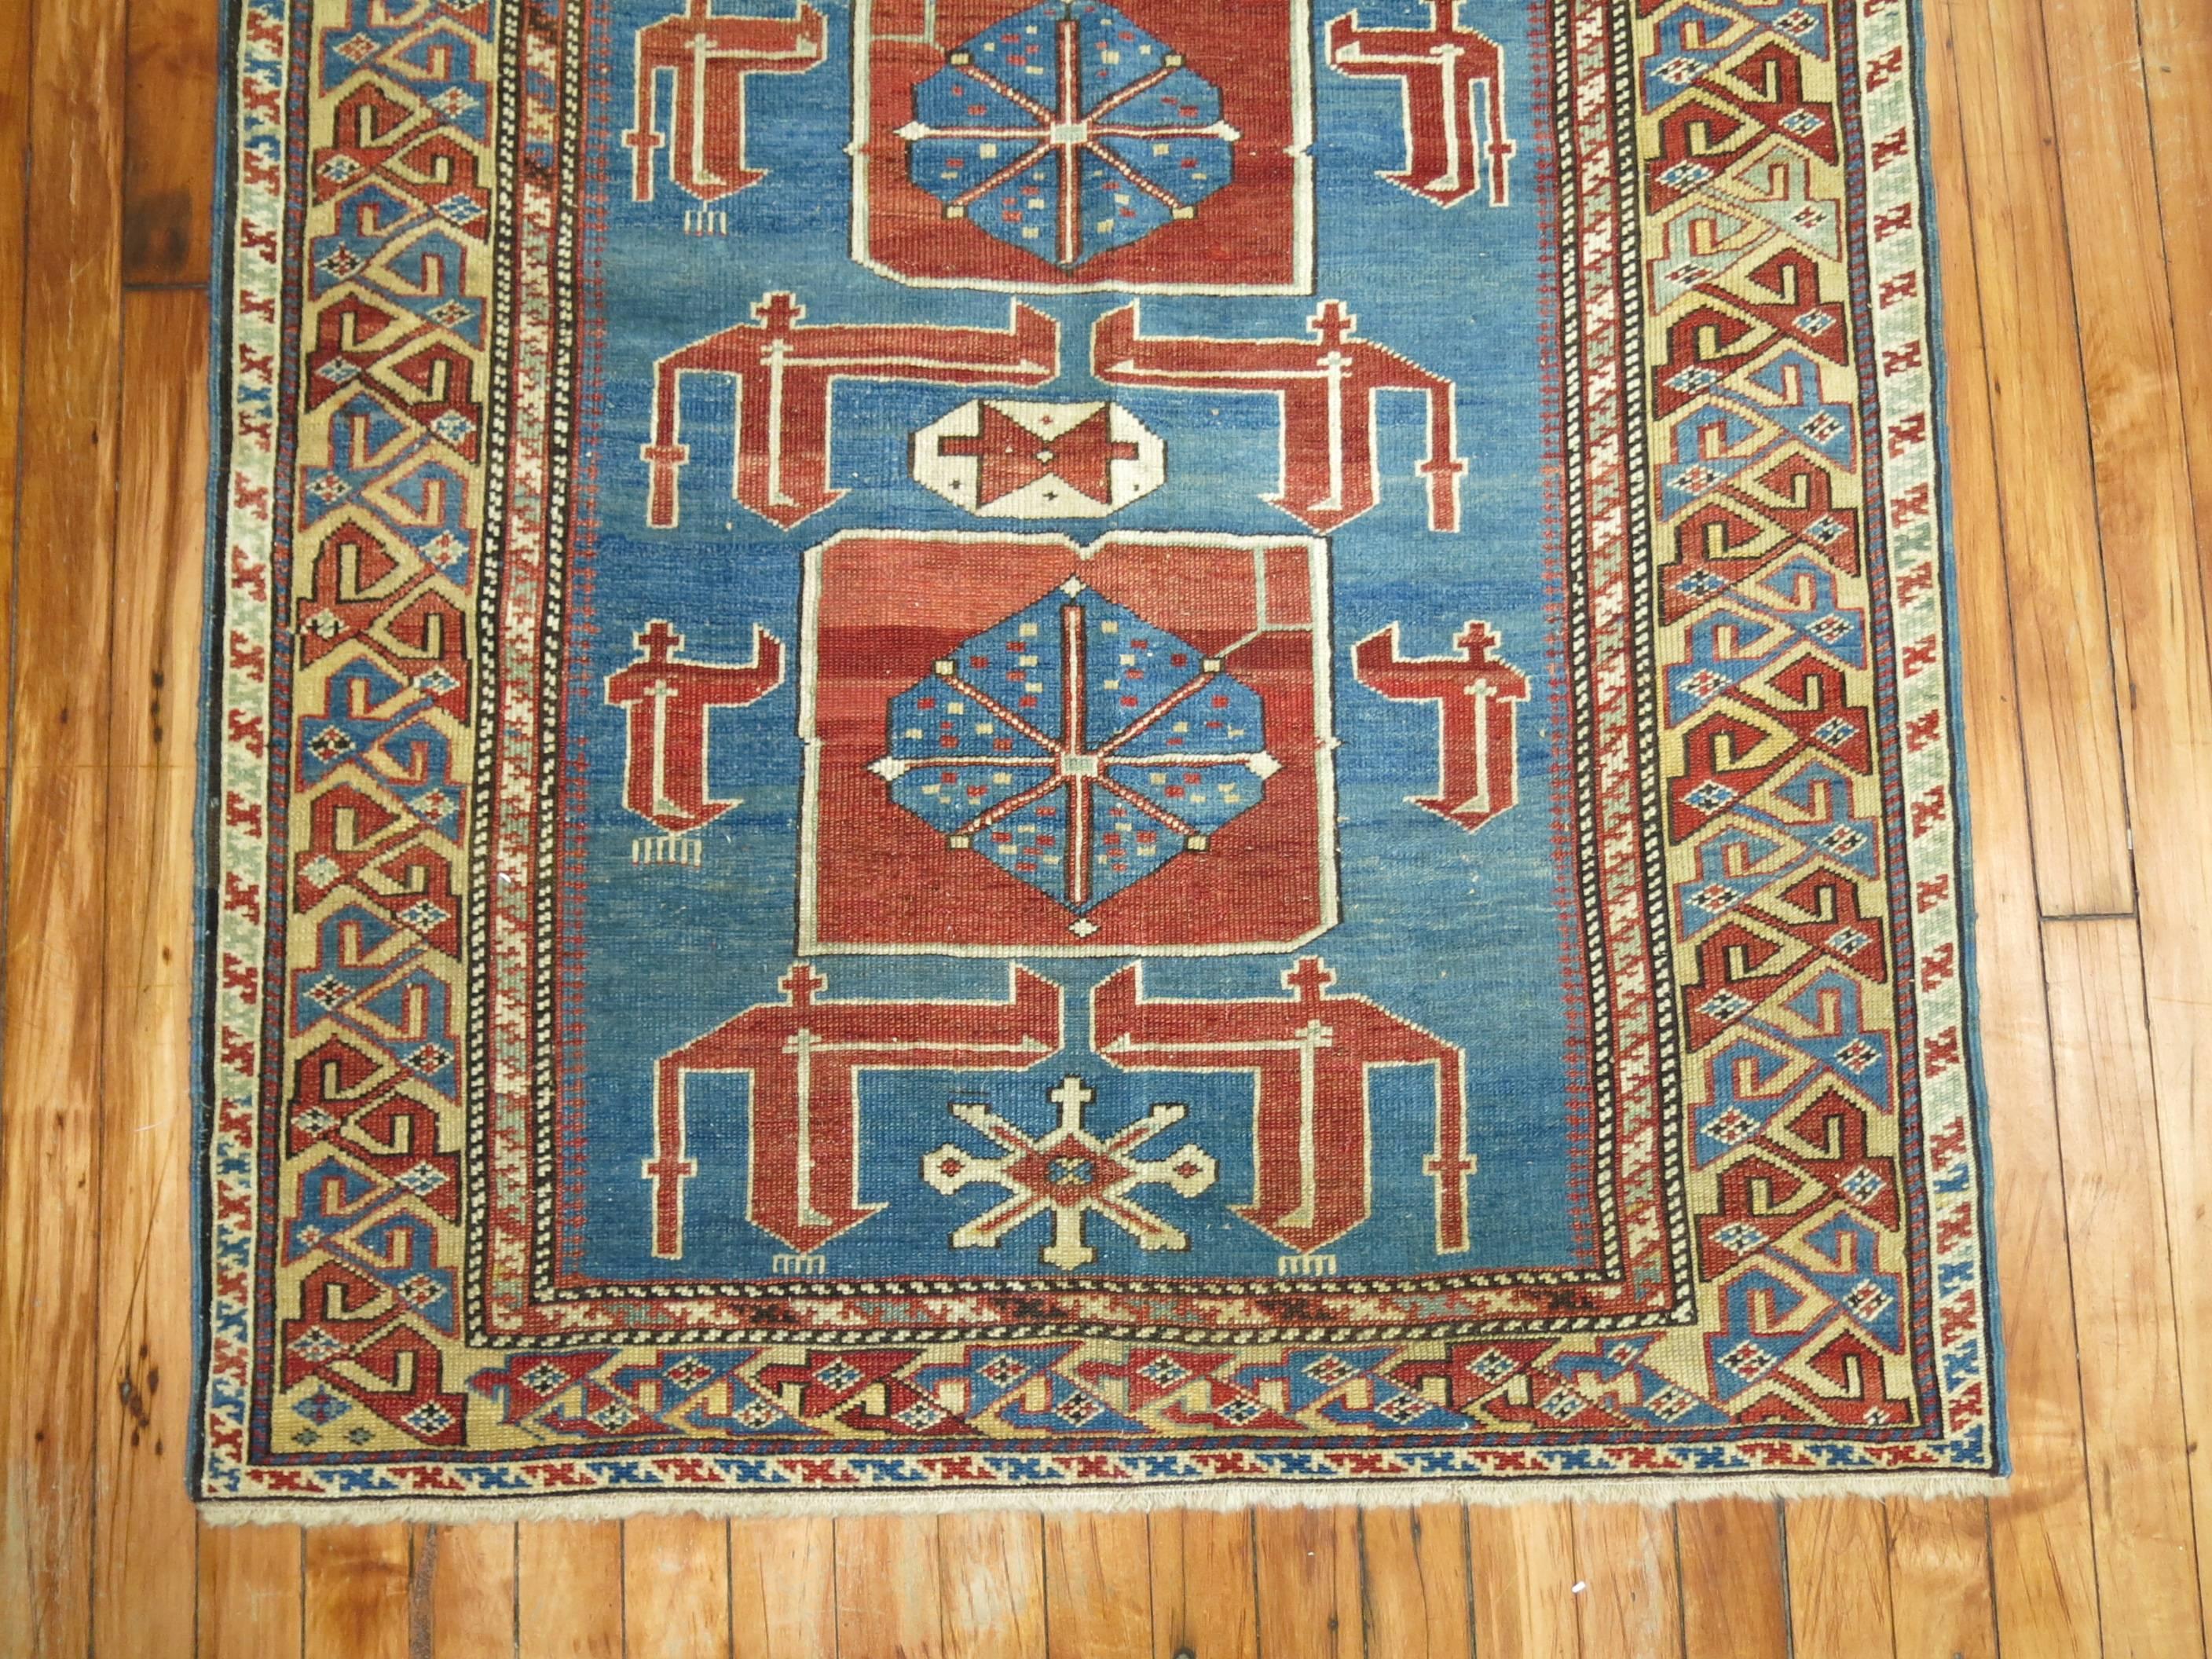 A turn of the 20th century finely woven antique Karaghasli Caucasian rug.

The brilliant colors and use of lateral elements make this a unique addition to any collection. These carpets were introduced into Russian hands by the market demand